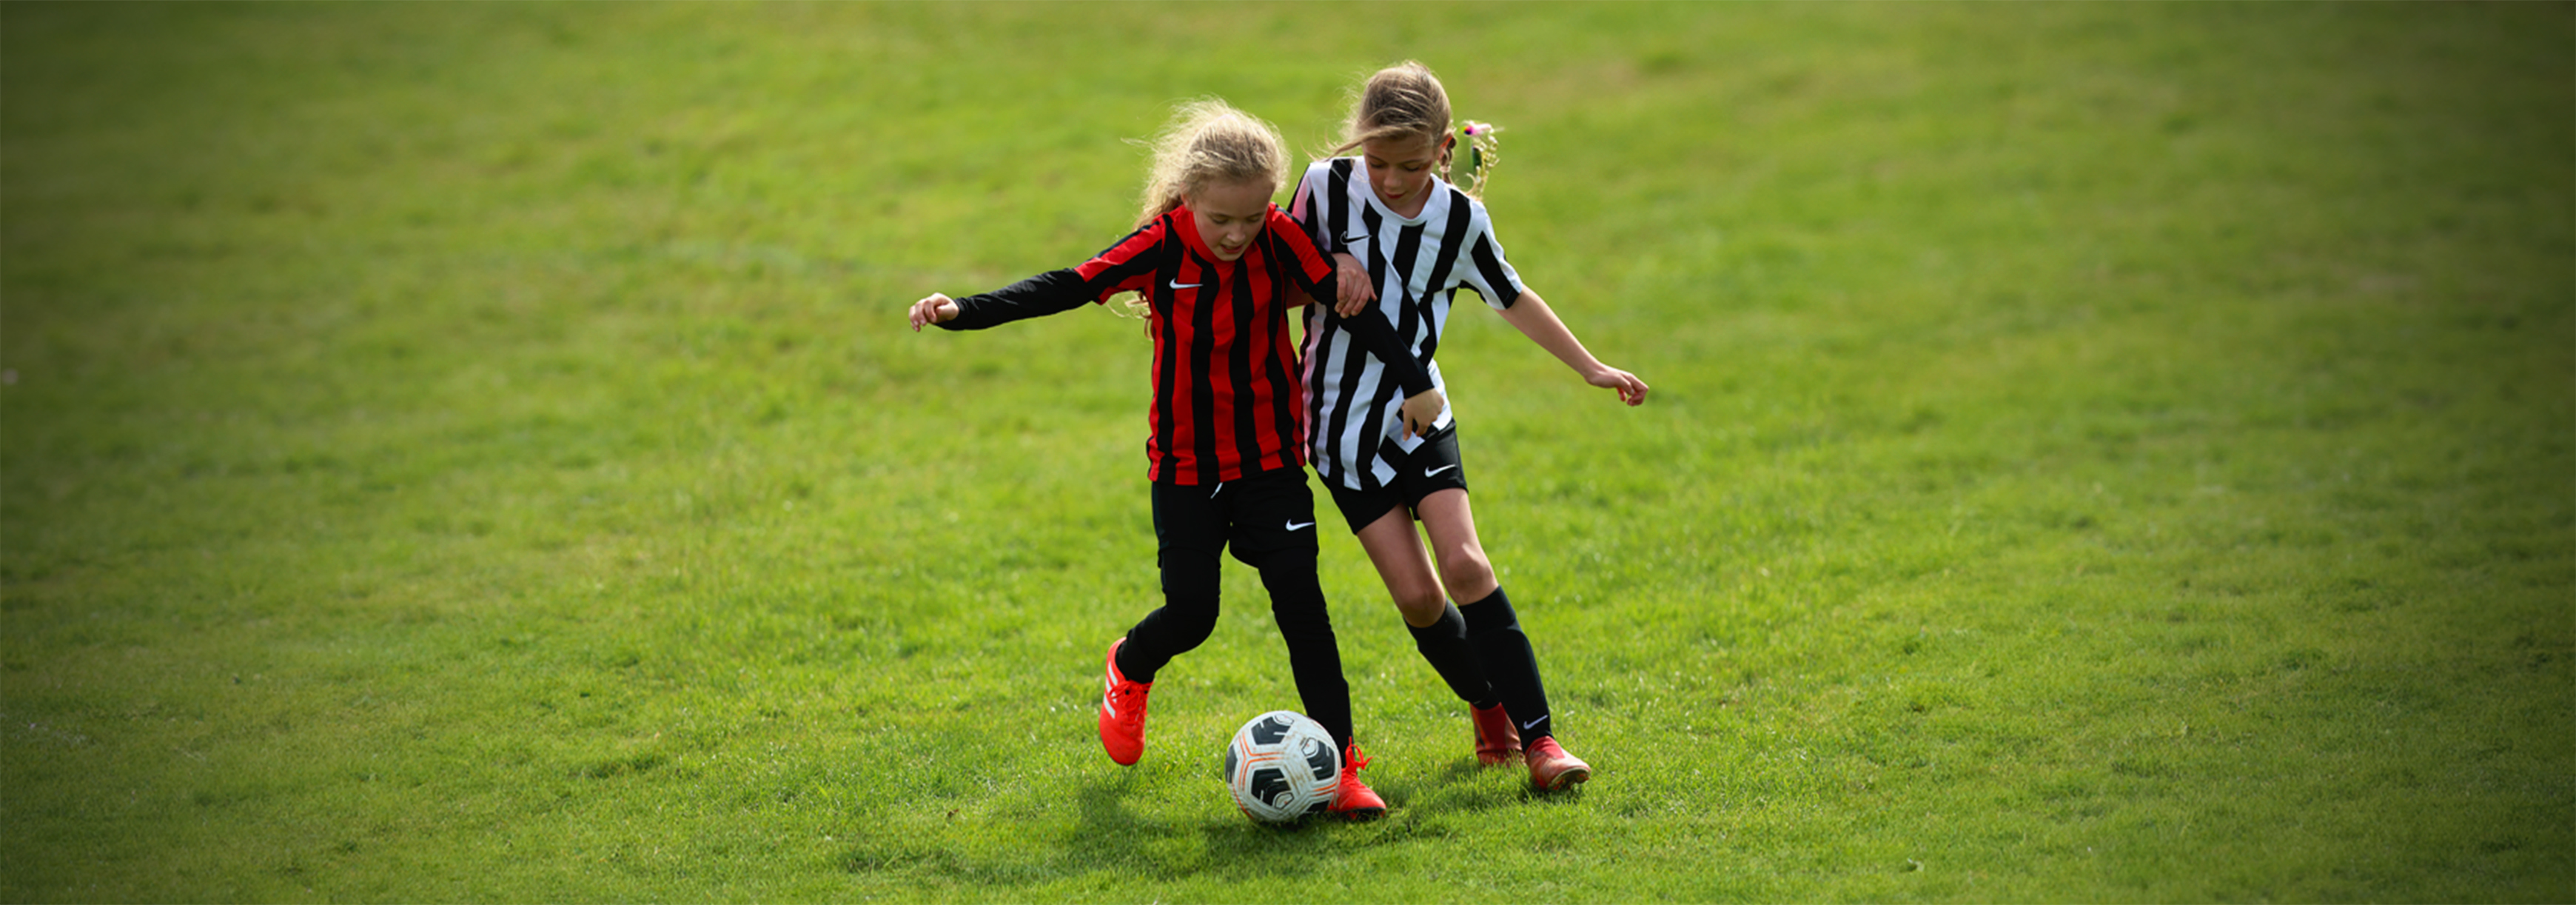 One player runs with the ball while another, close behind her on the left, puts her under pressure as she looks to make a tackle.